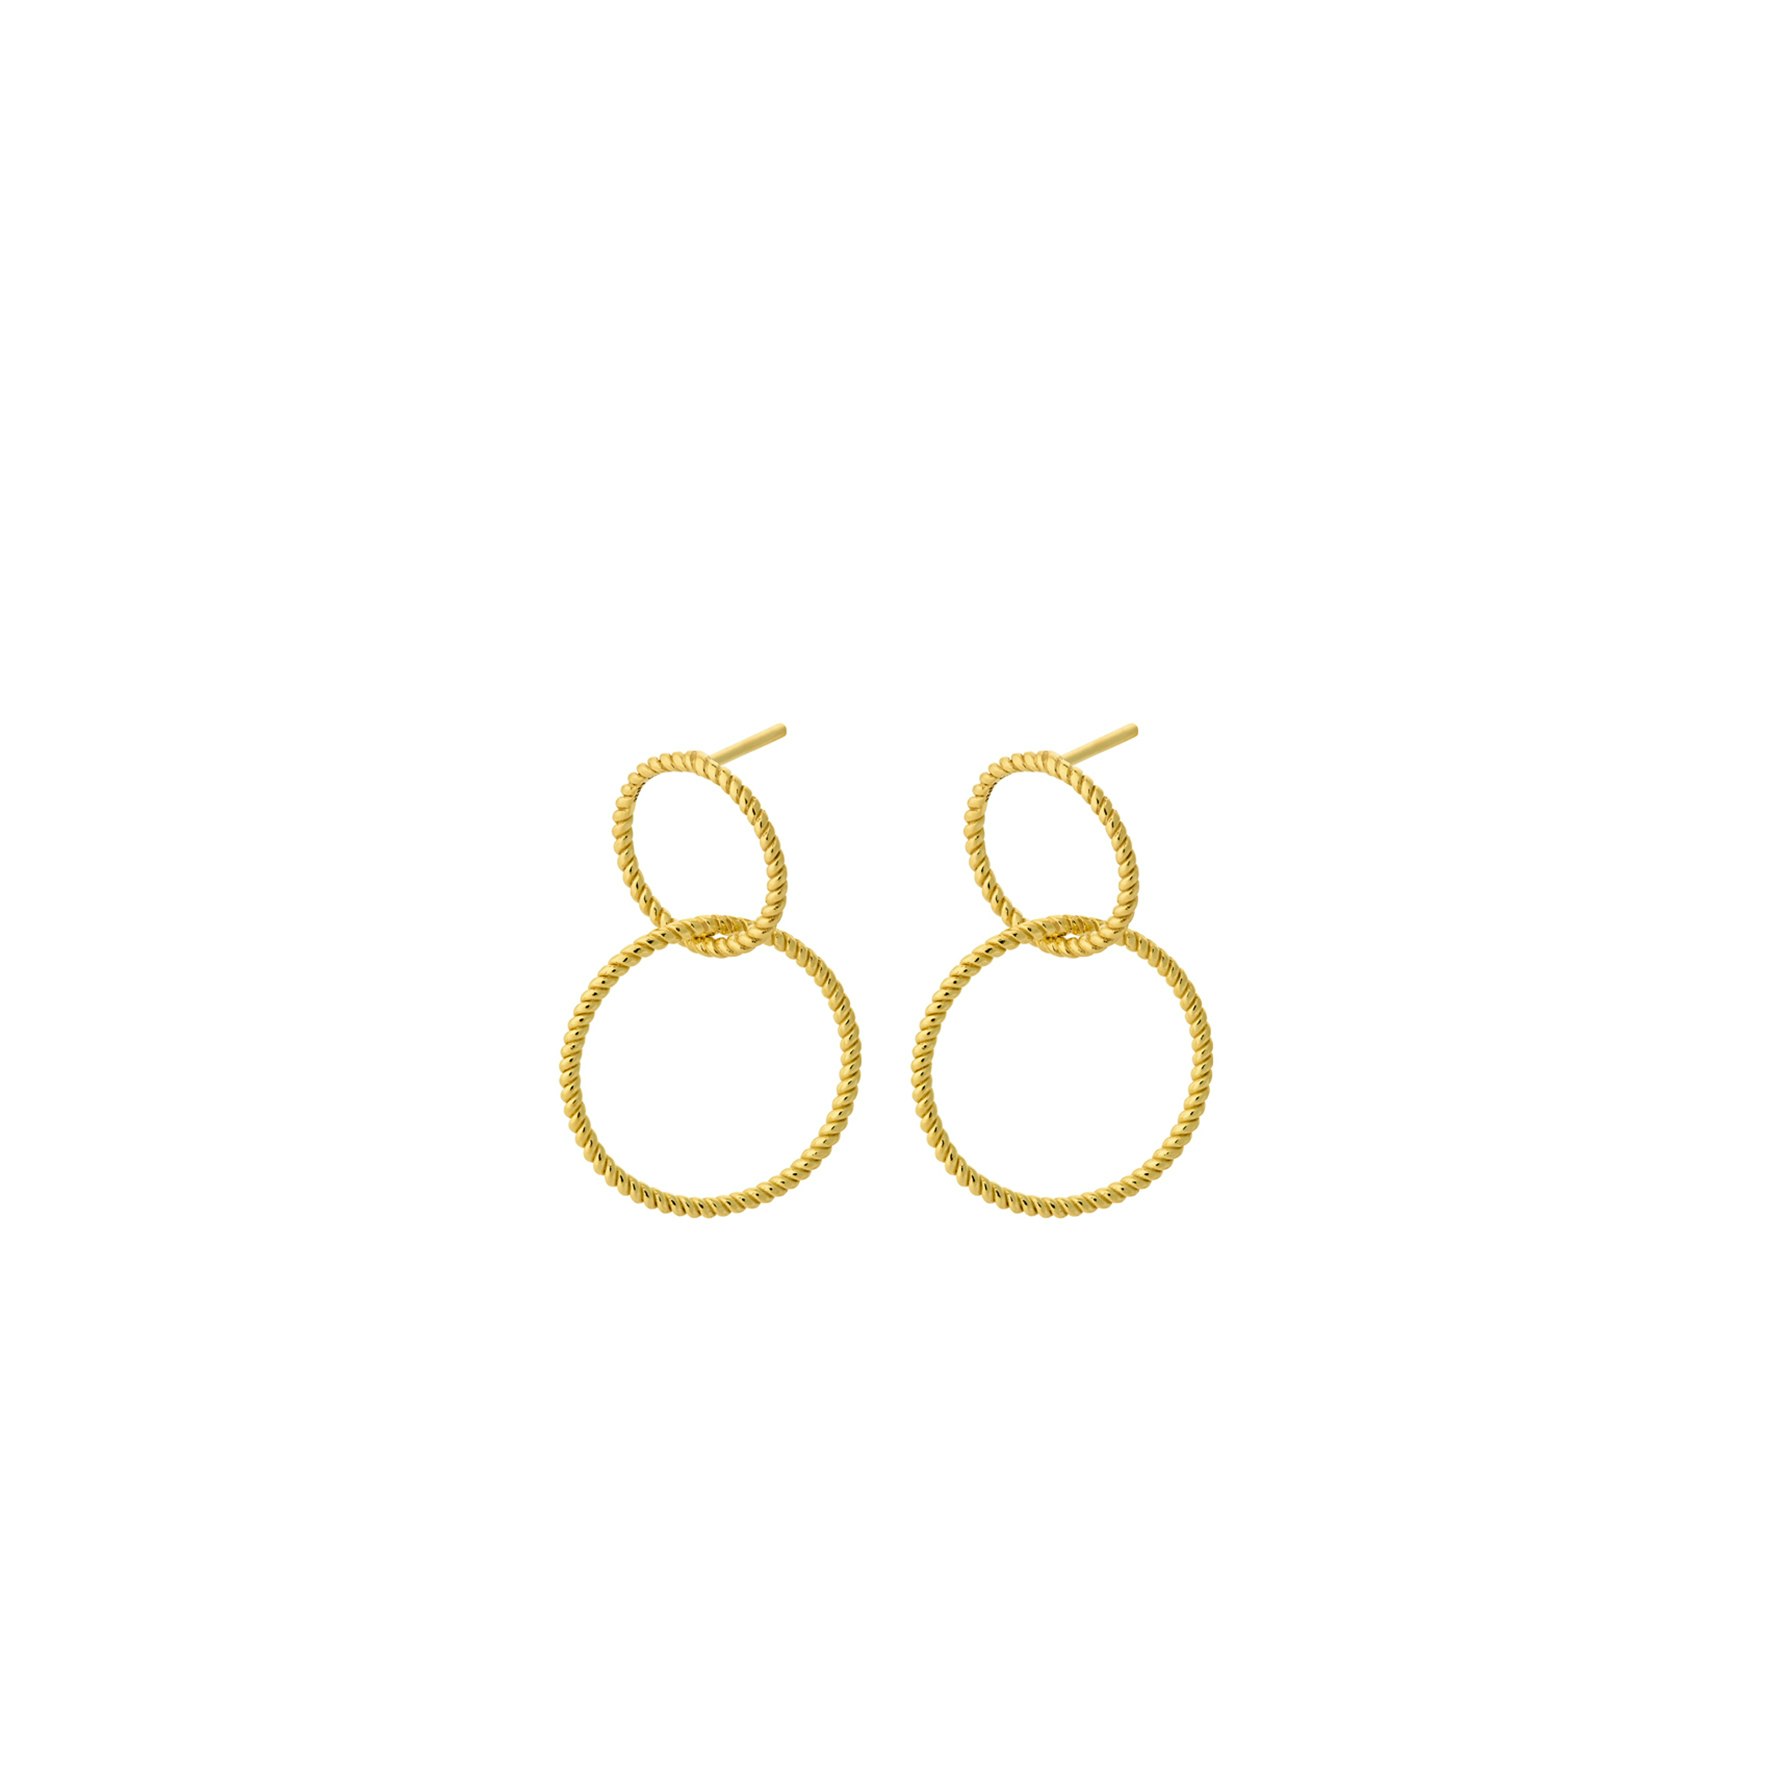 Double Twisted Earrings from Pernille Corydon in Goldplated Silver Sterling 925